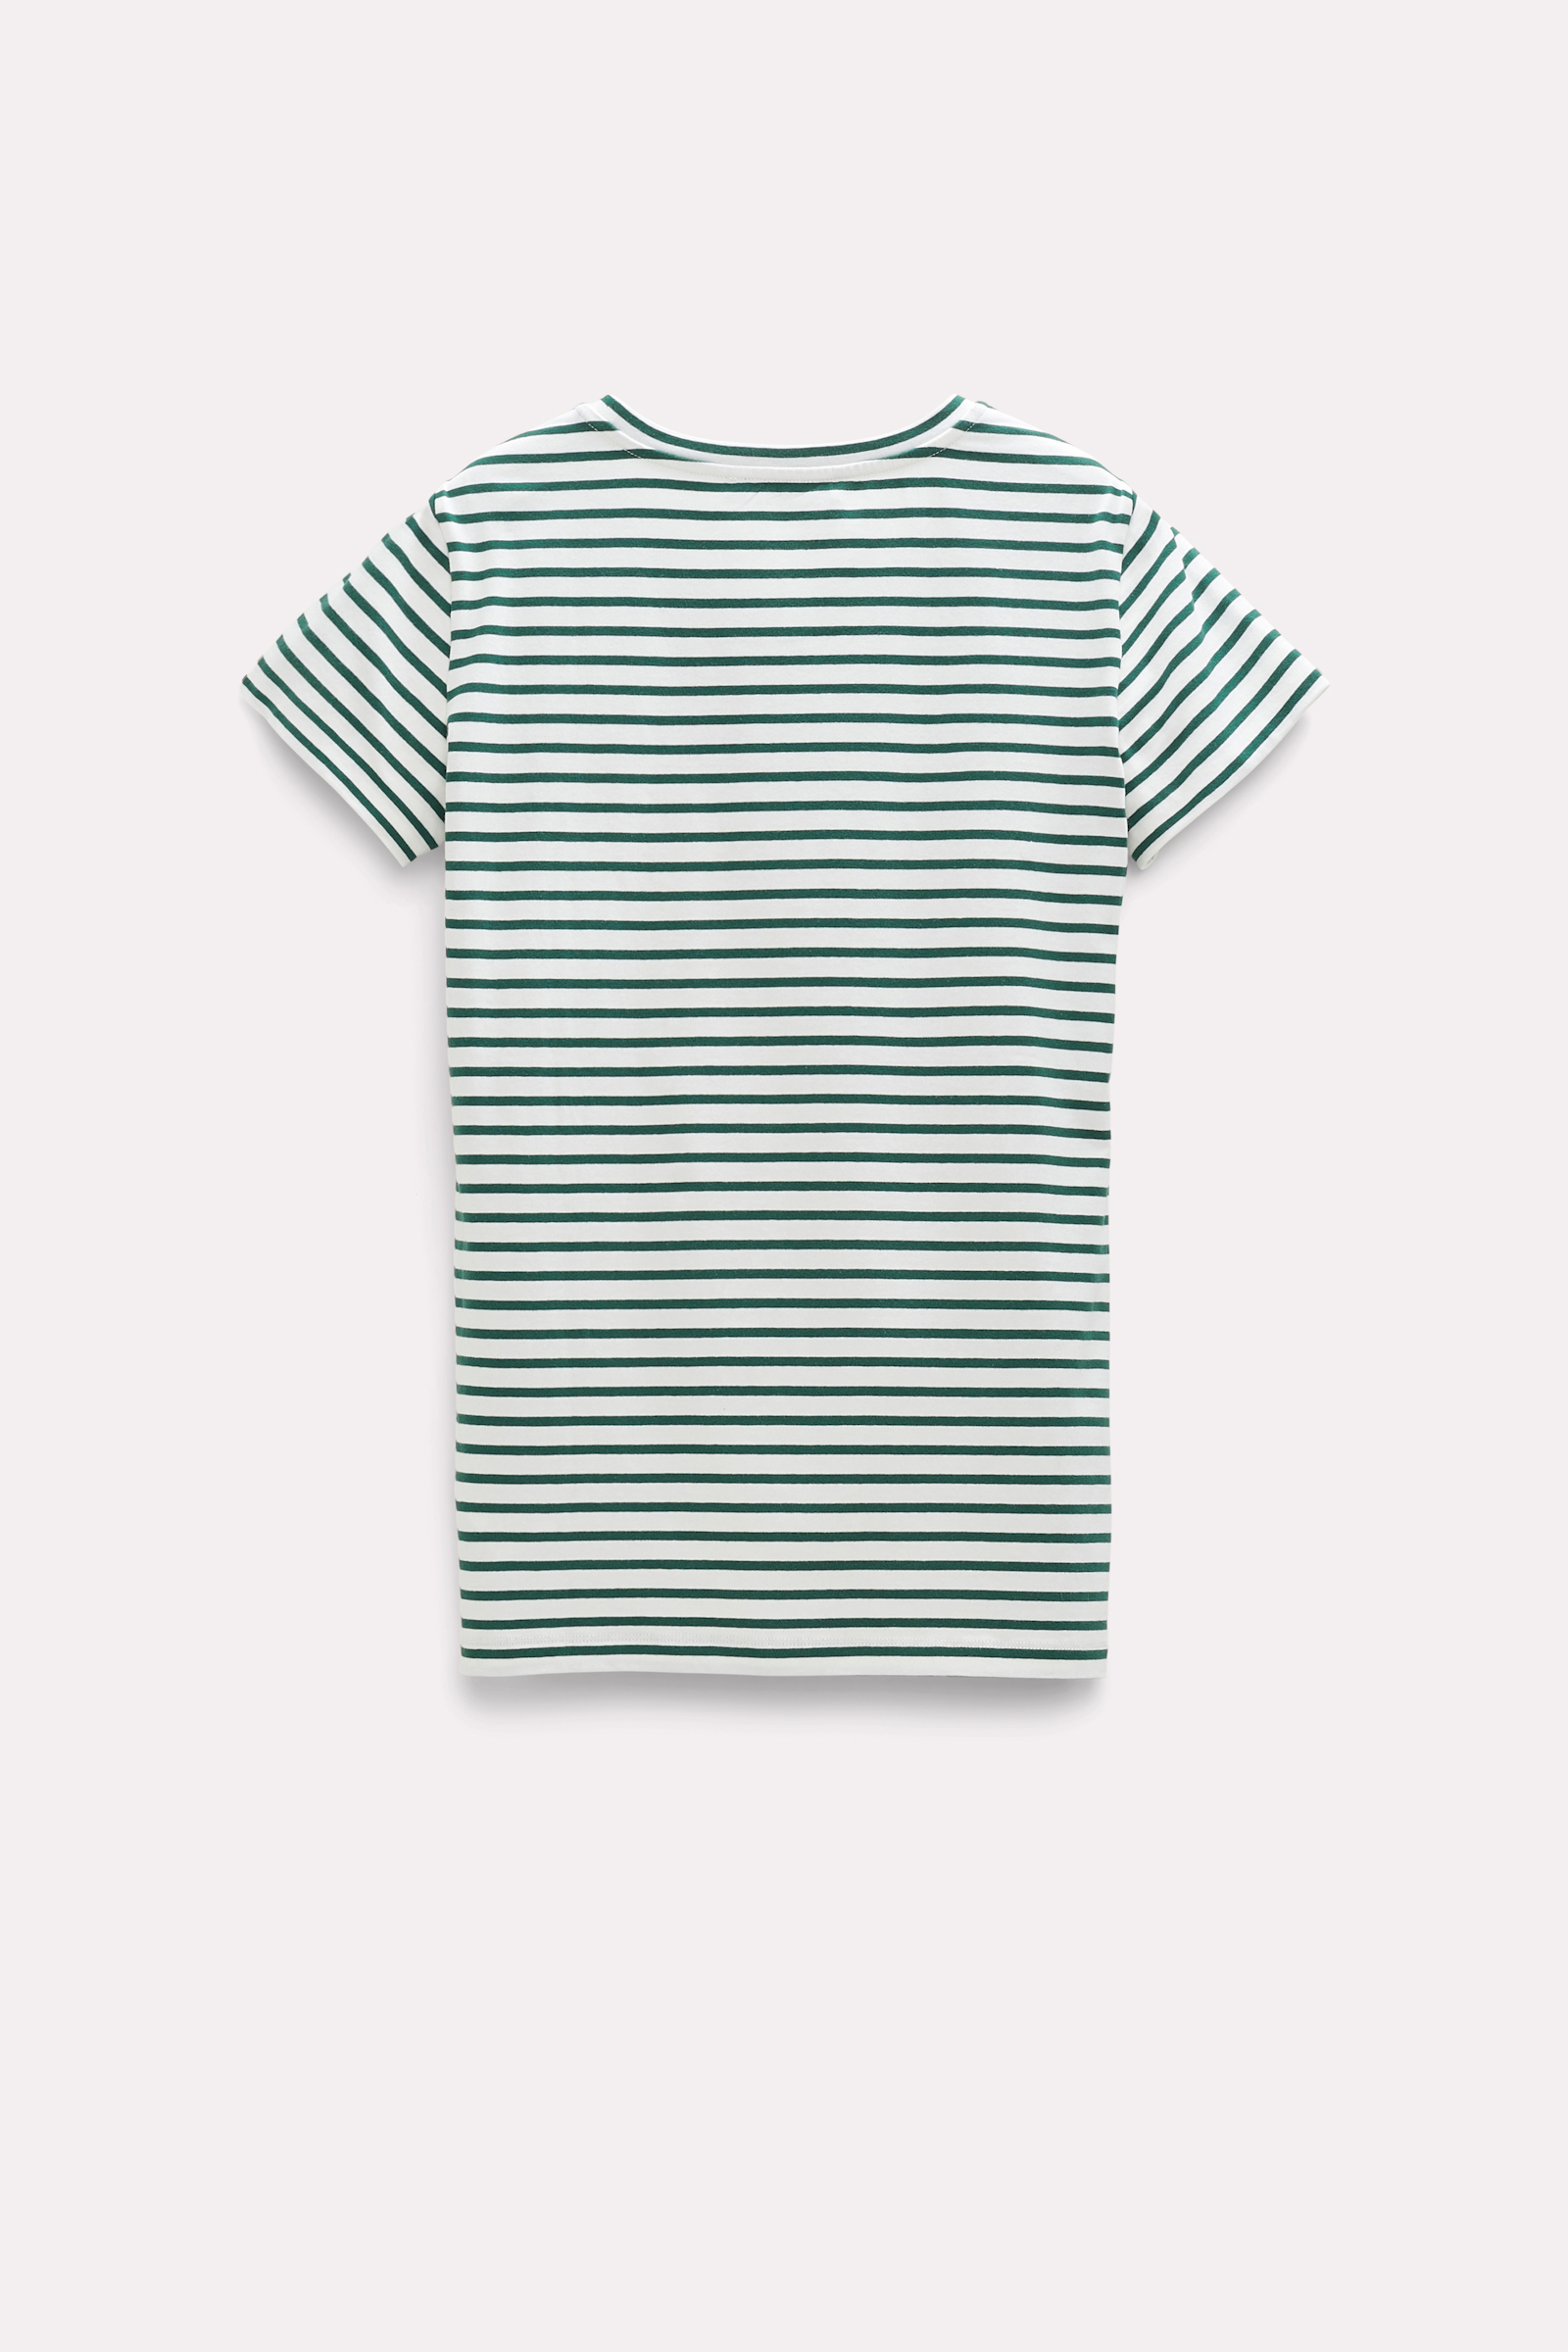 Dorothee Schumacher Striped round neck top with embroidery green cream mix